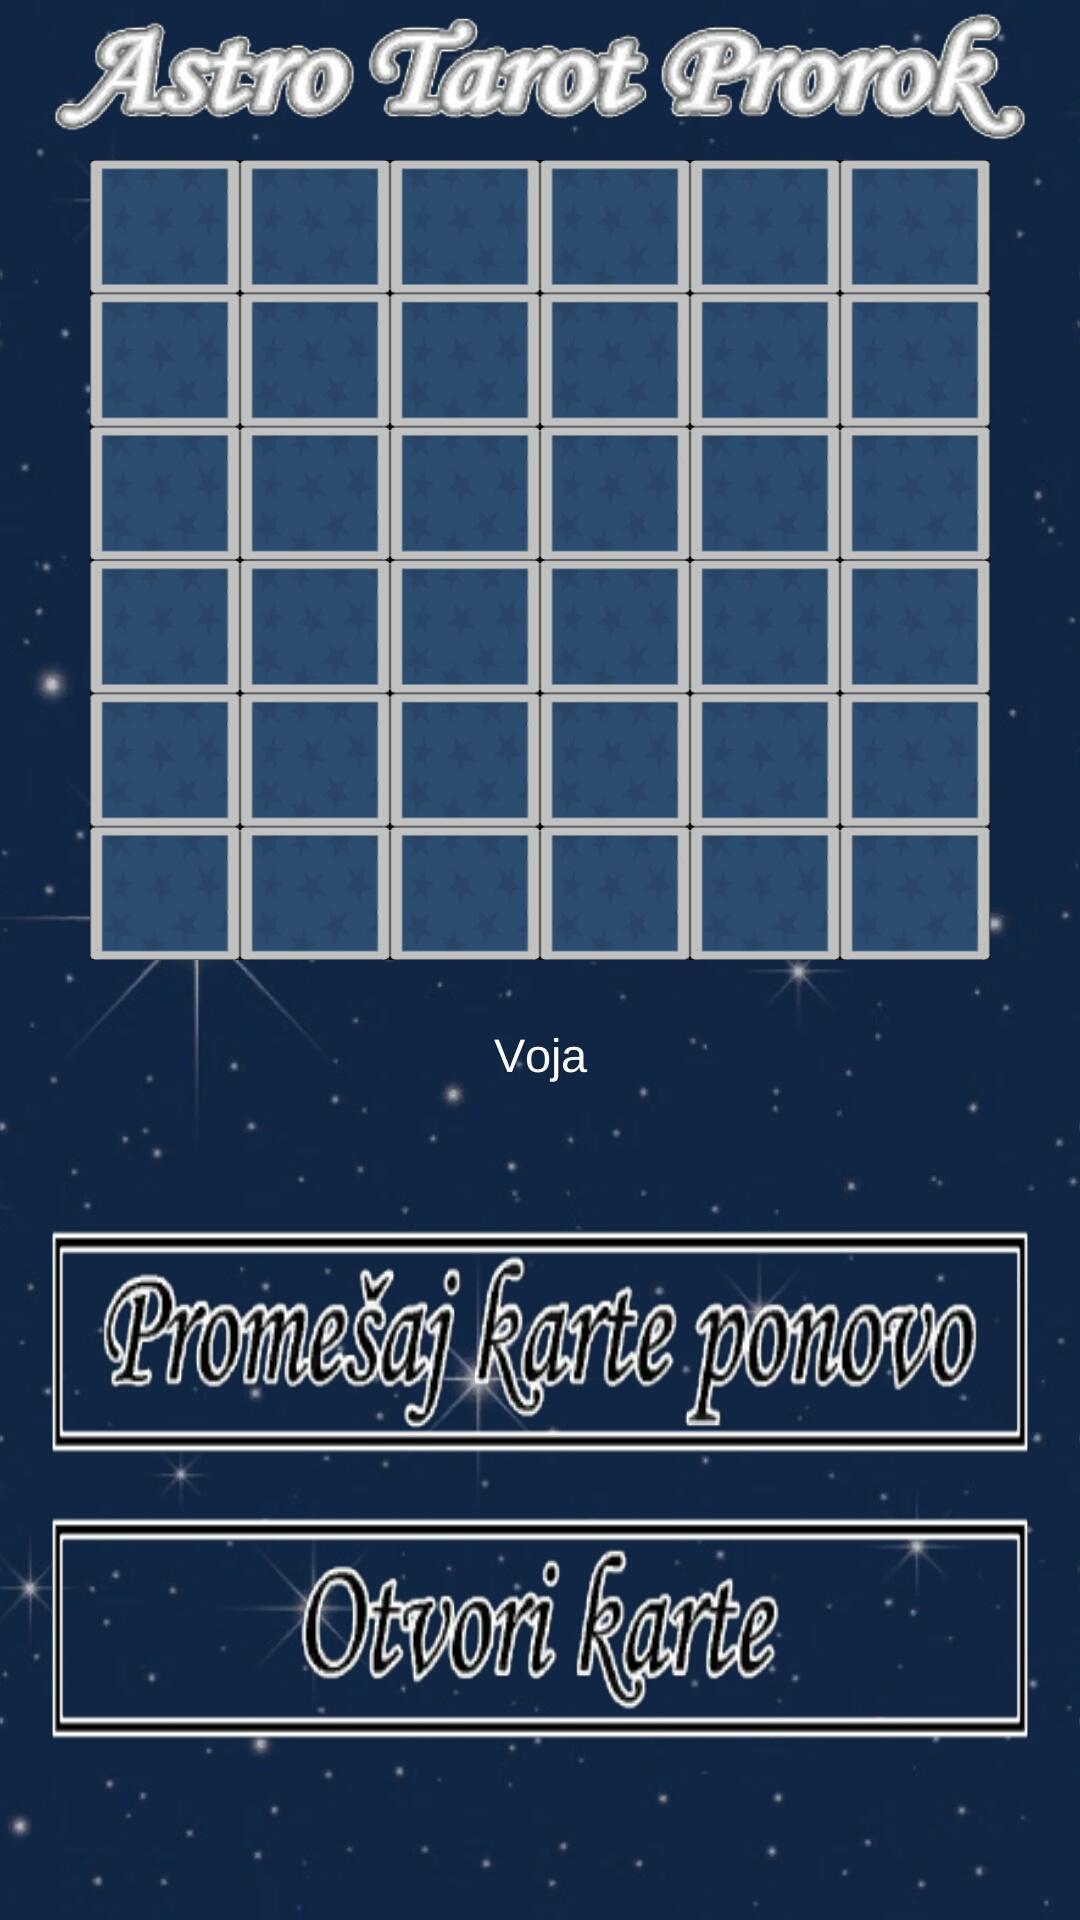 Astro Tarot Prorok For Android Apk Download